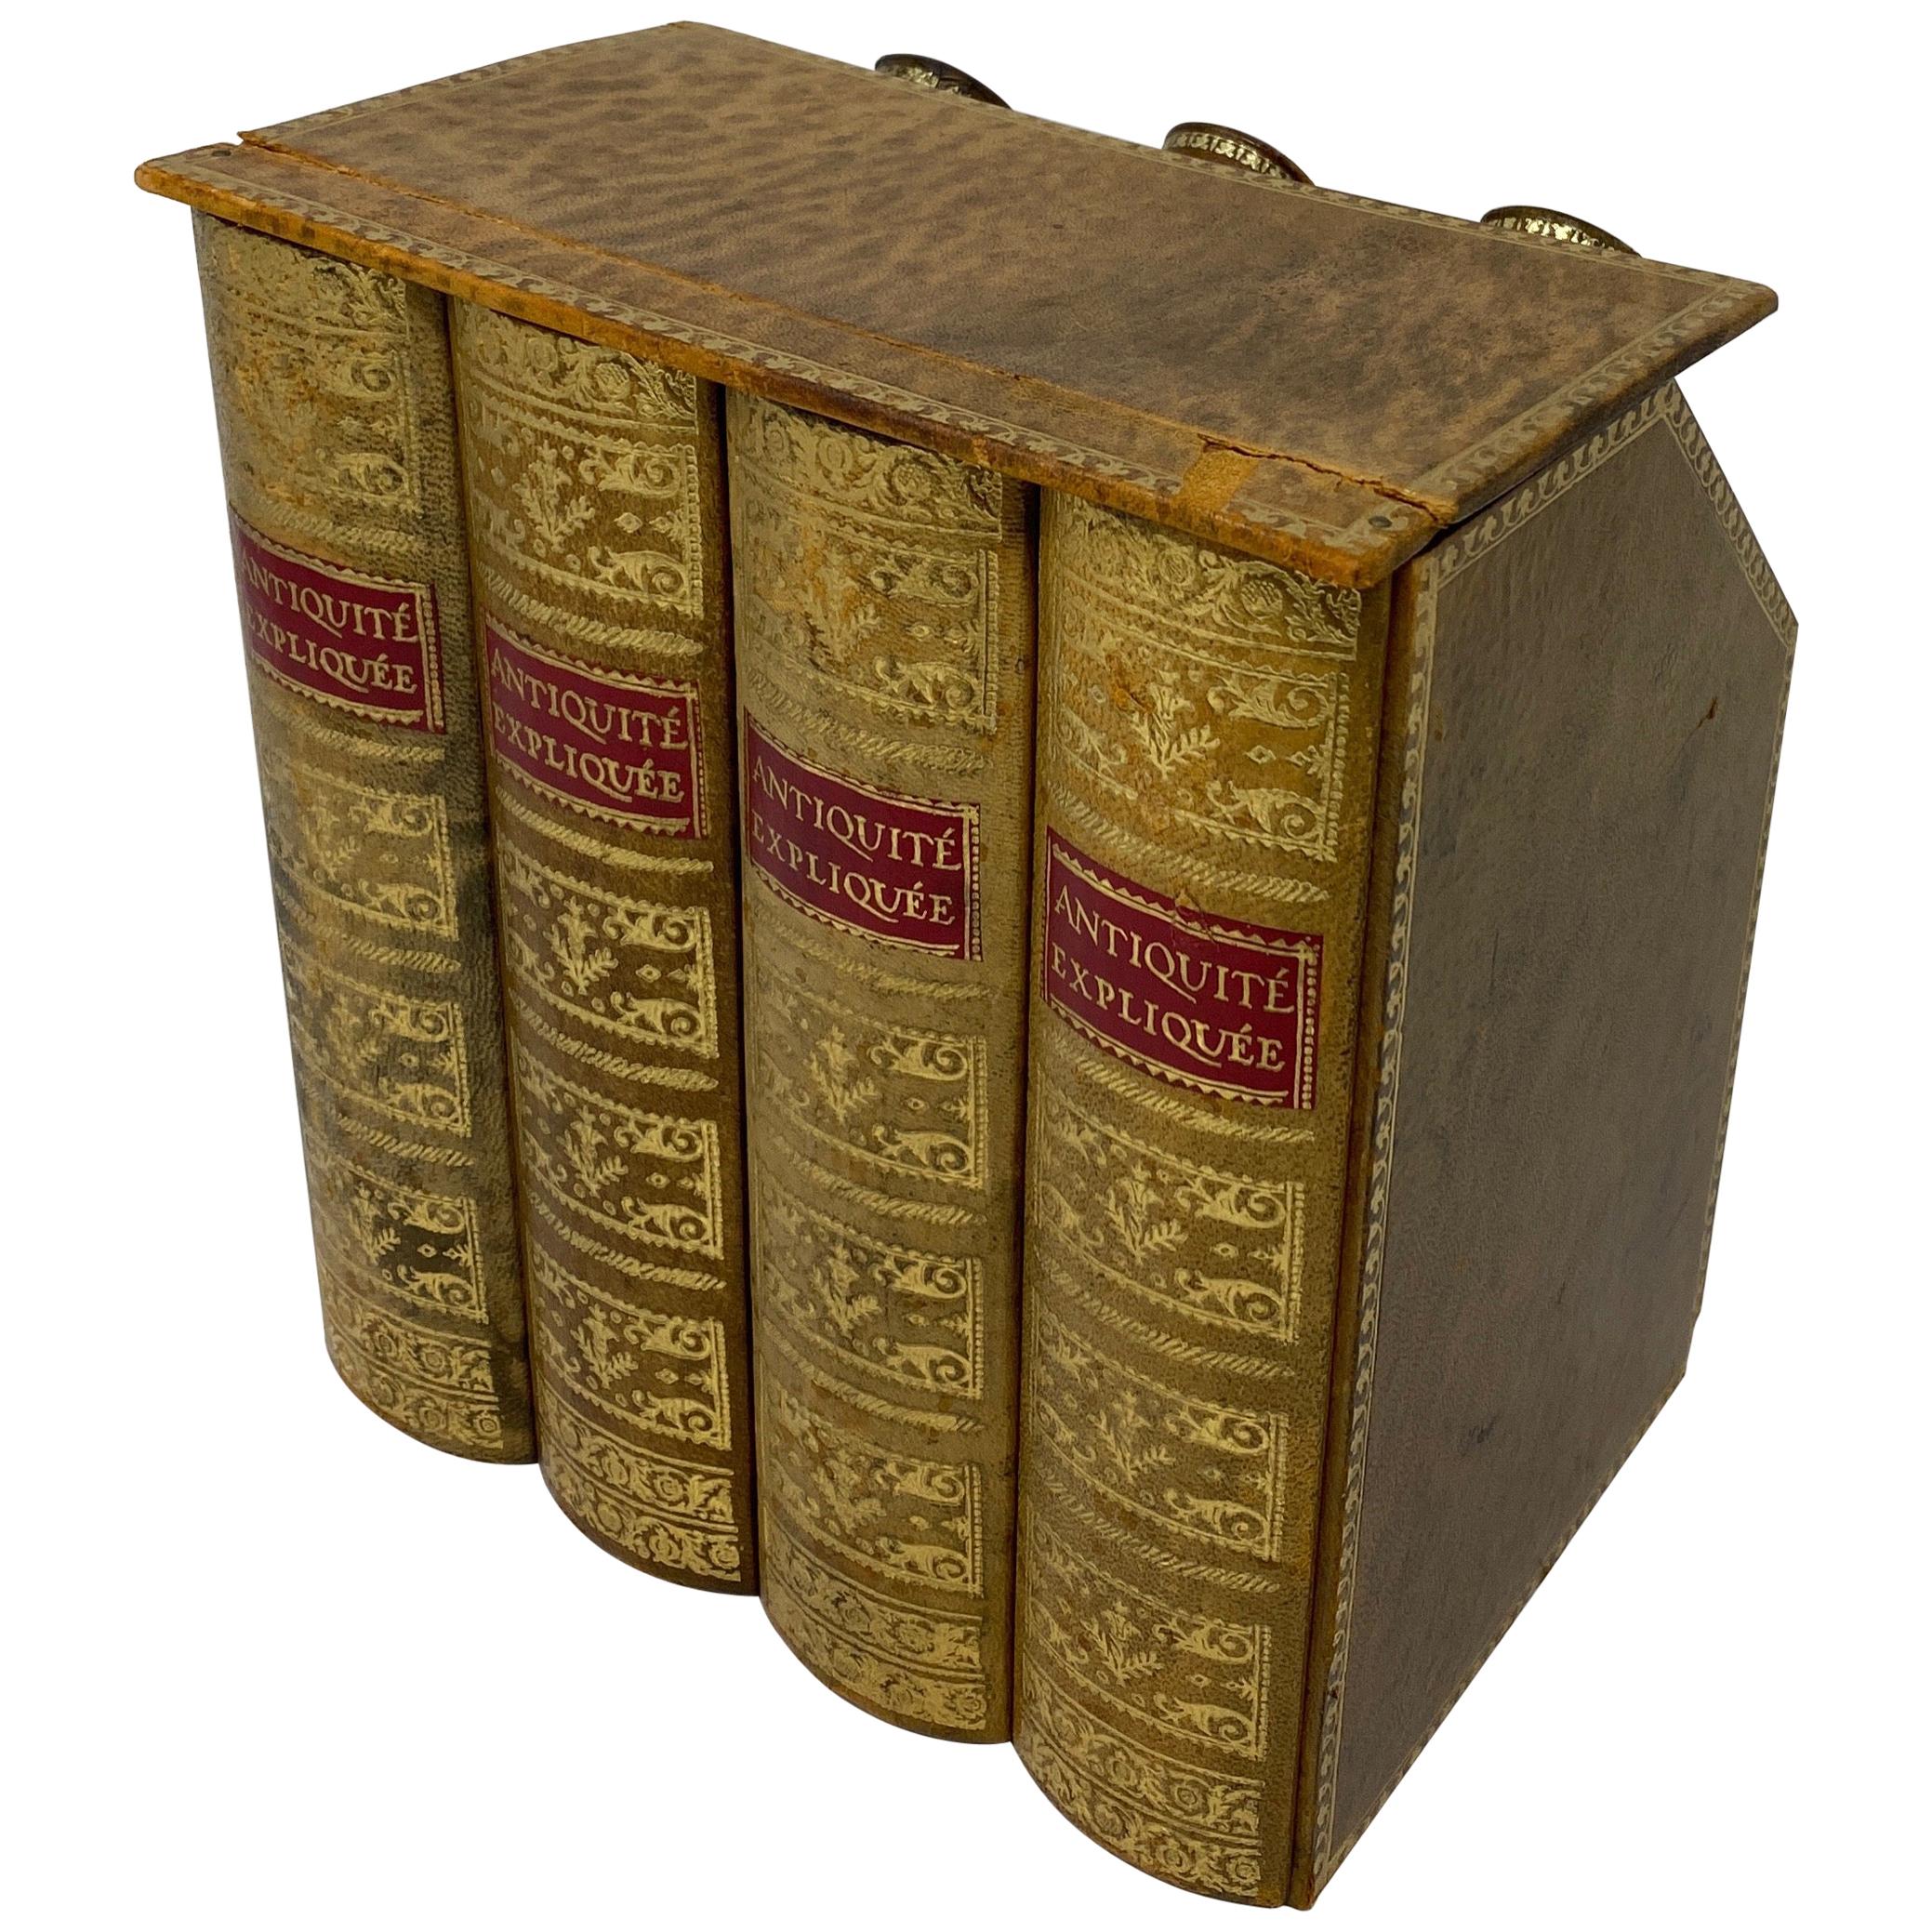 Collectible Faux Books with Three Hidden Flasks